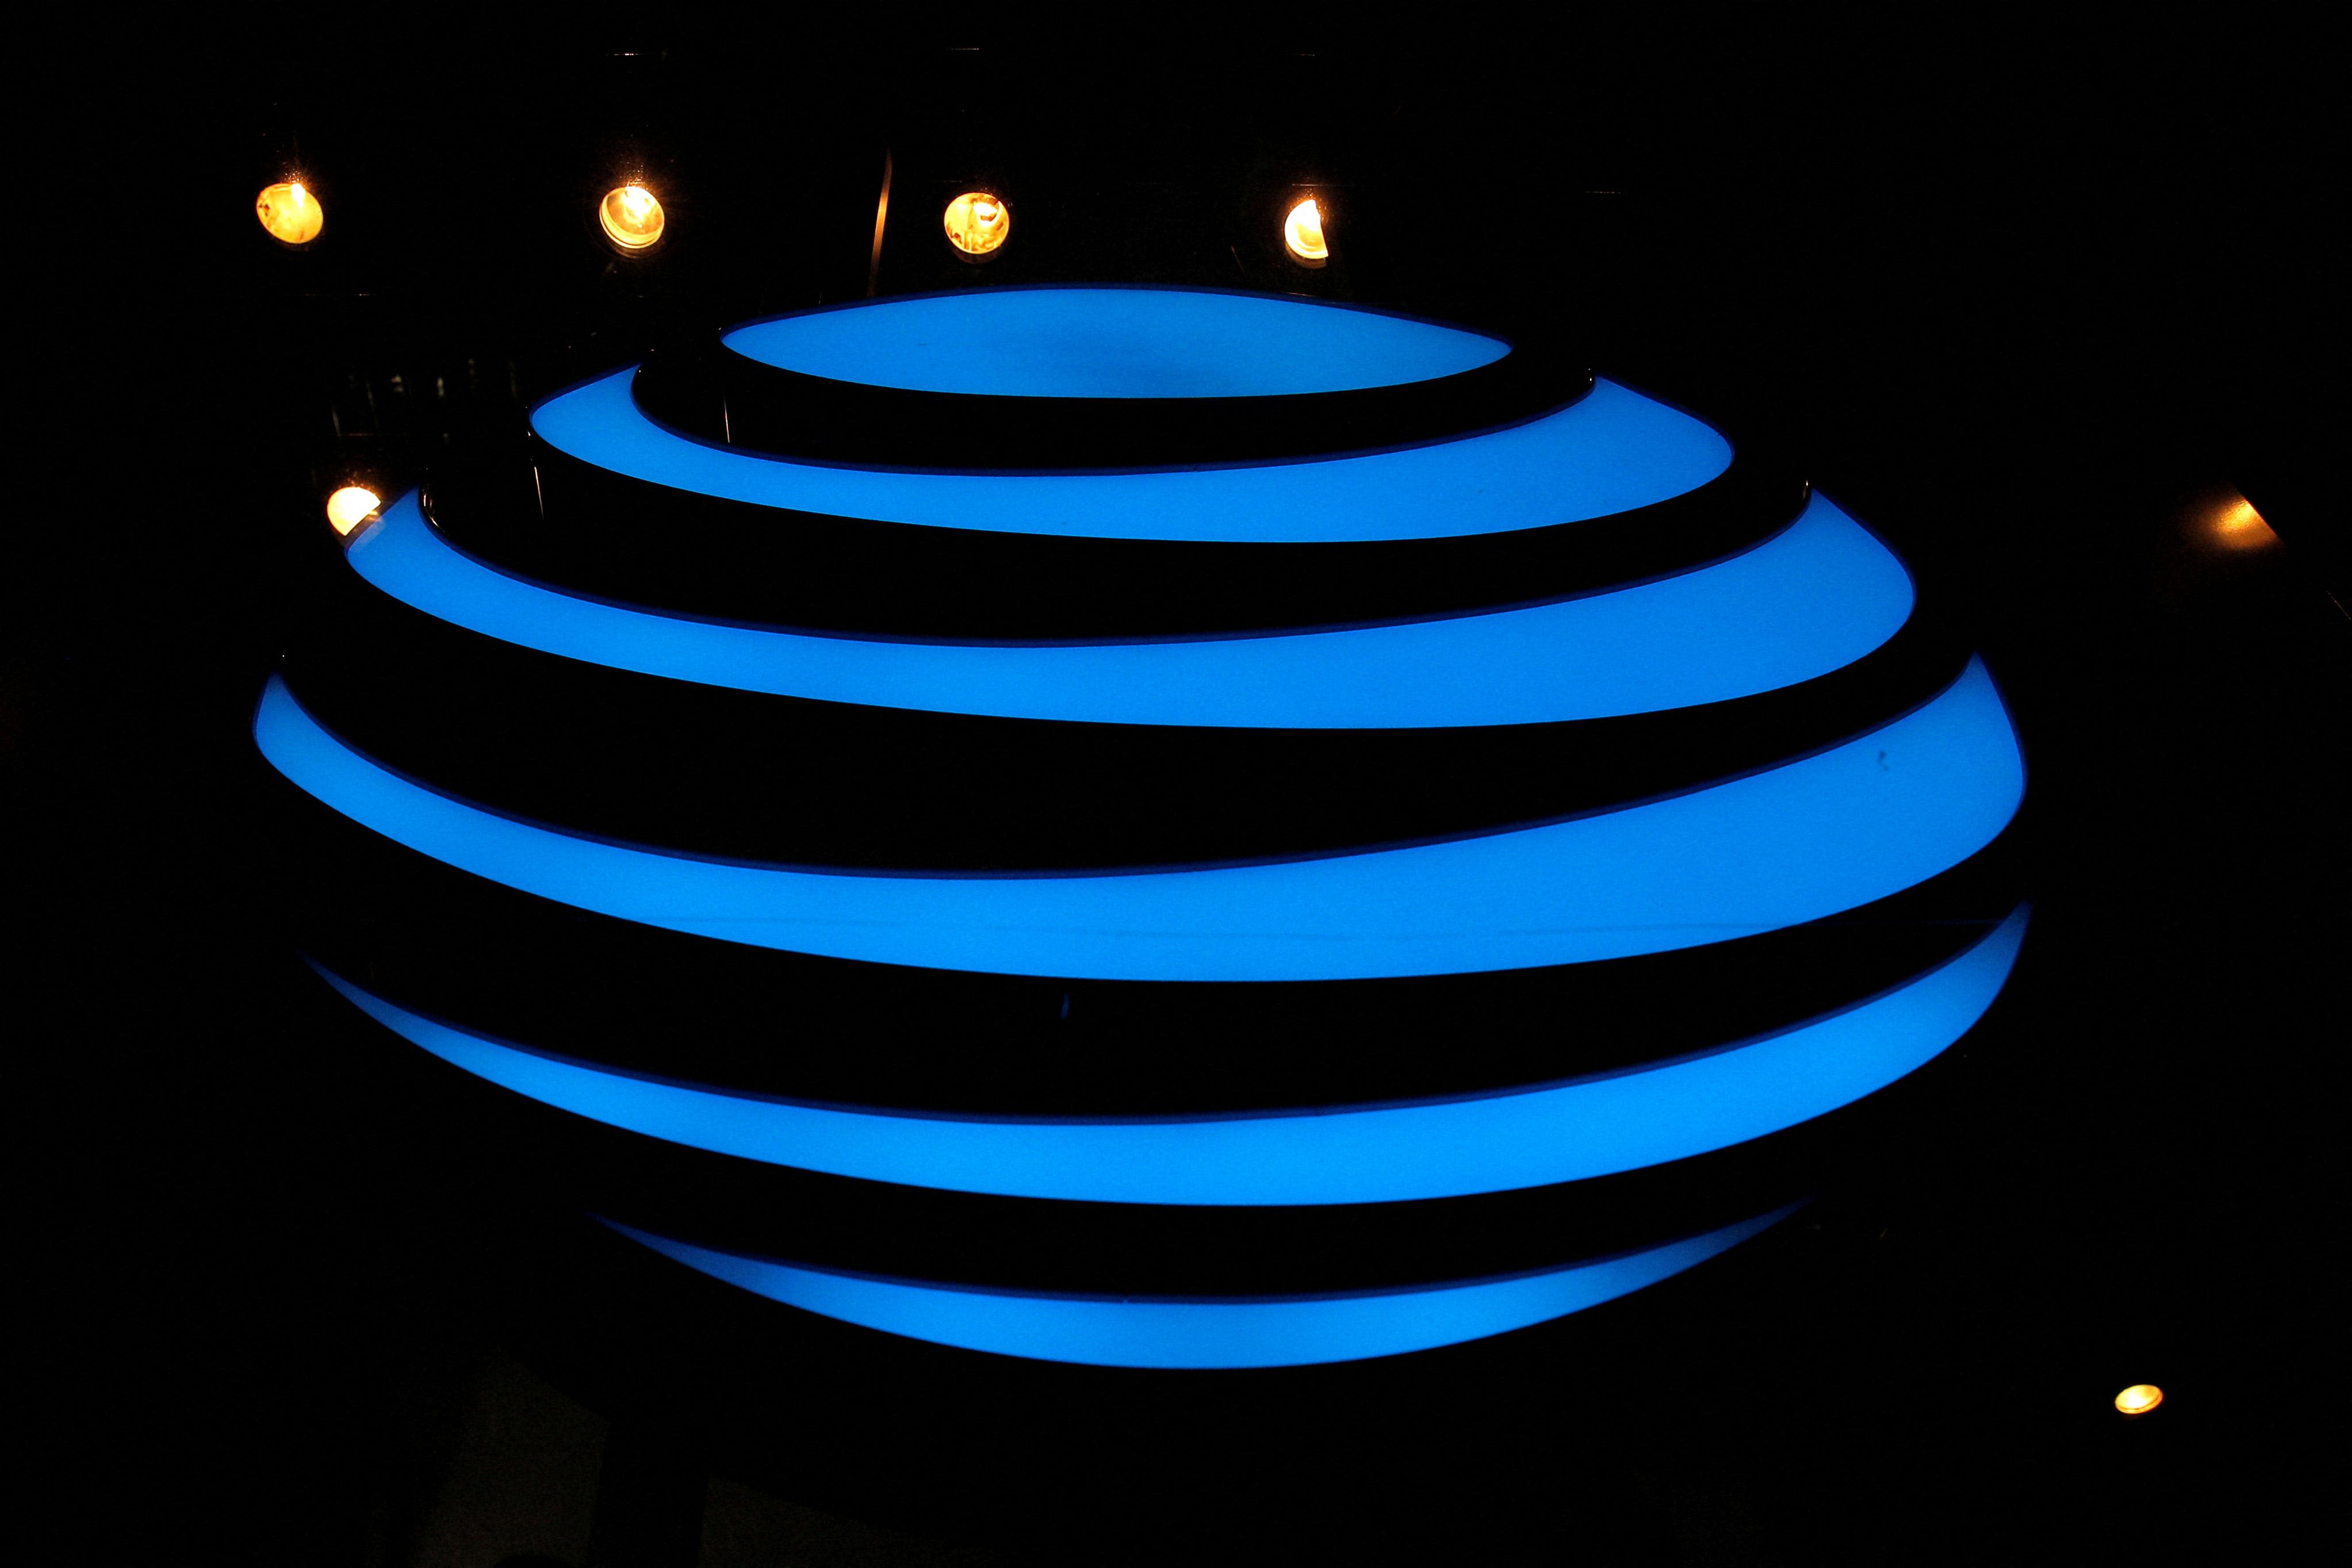 AT&T: Data from around 109 million U.S. customer accounts illegally downloaded